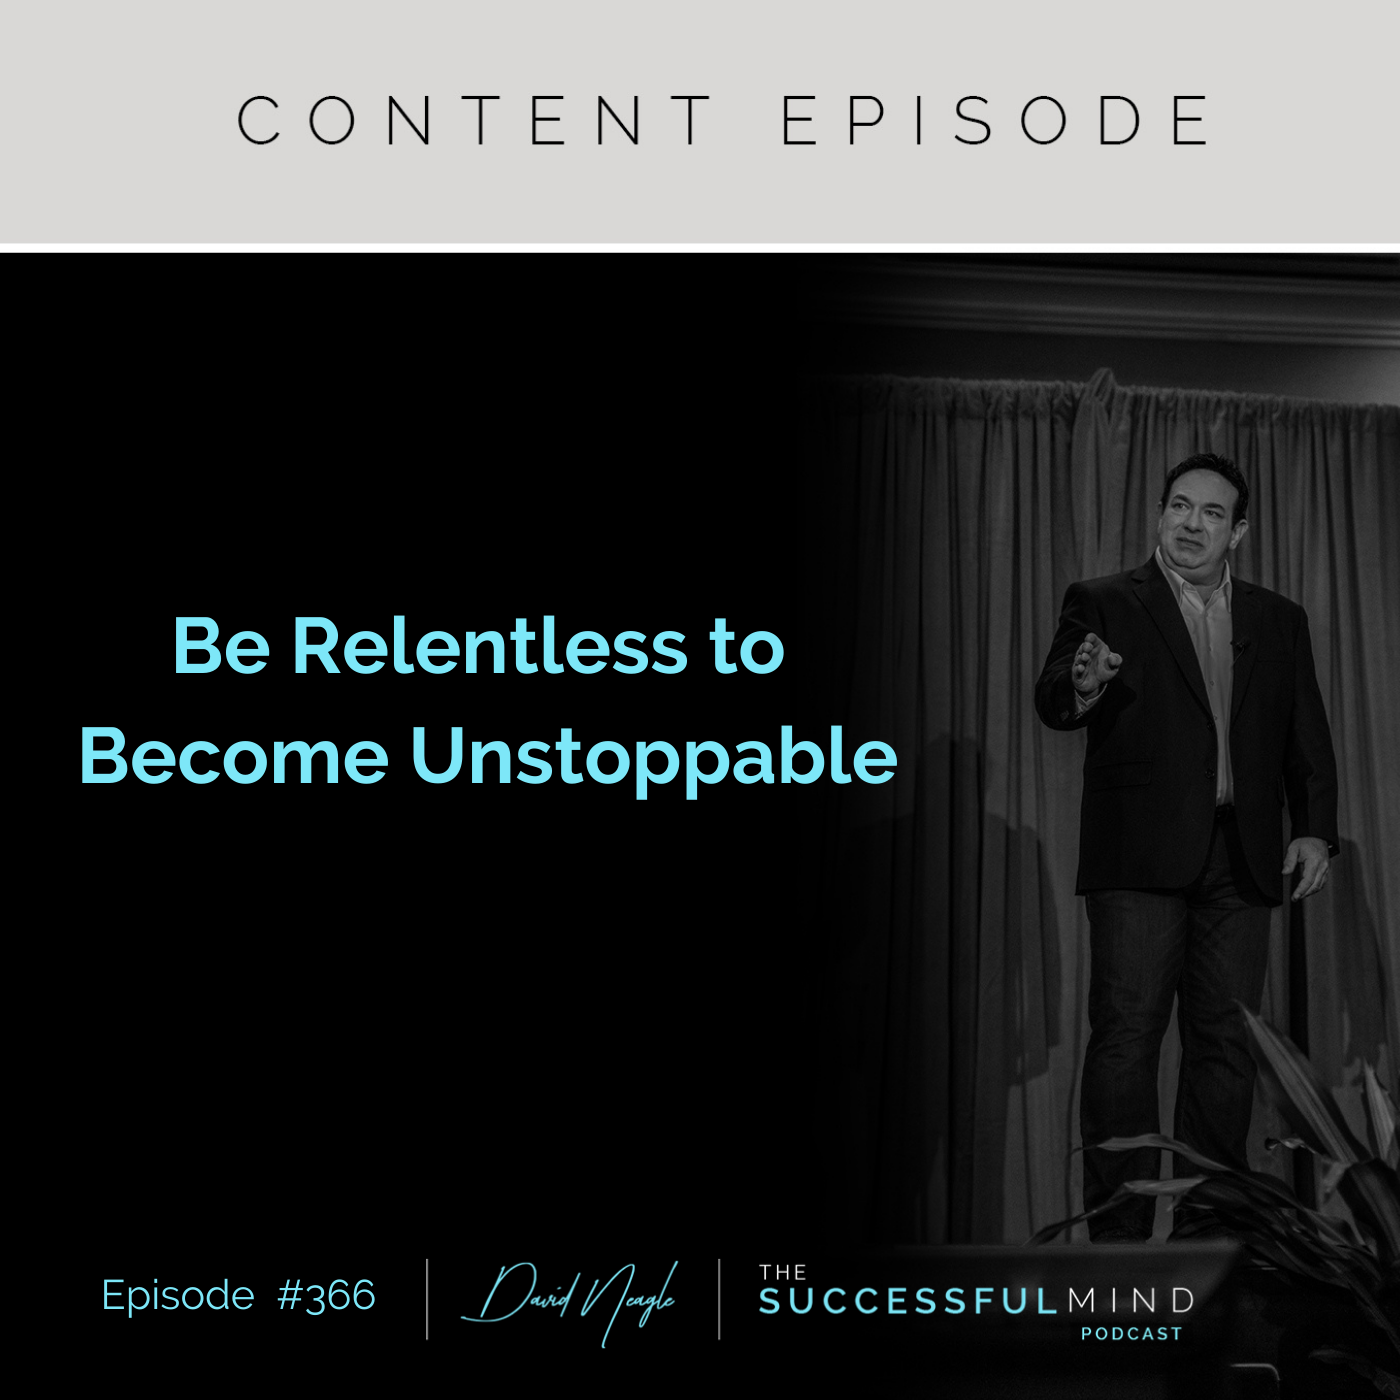 The Successful Mind Podcast - Episode 366 - Be Relentless to Become Unstoppable